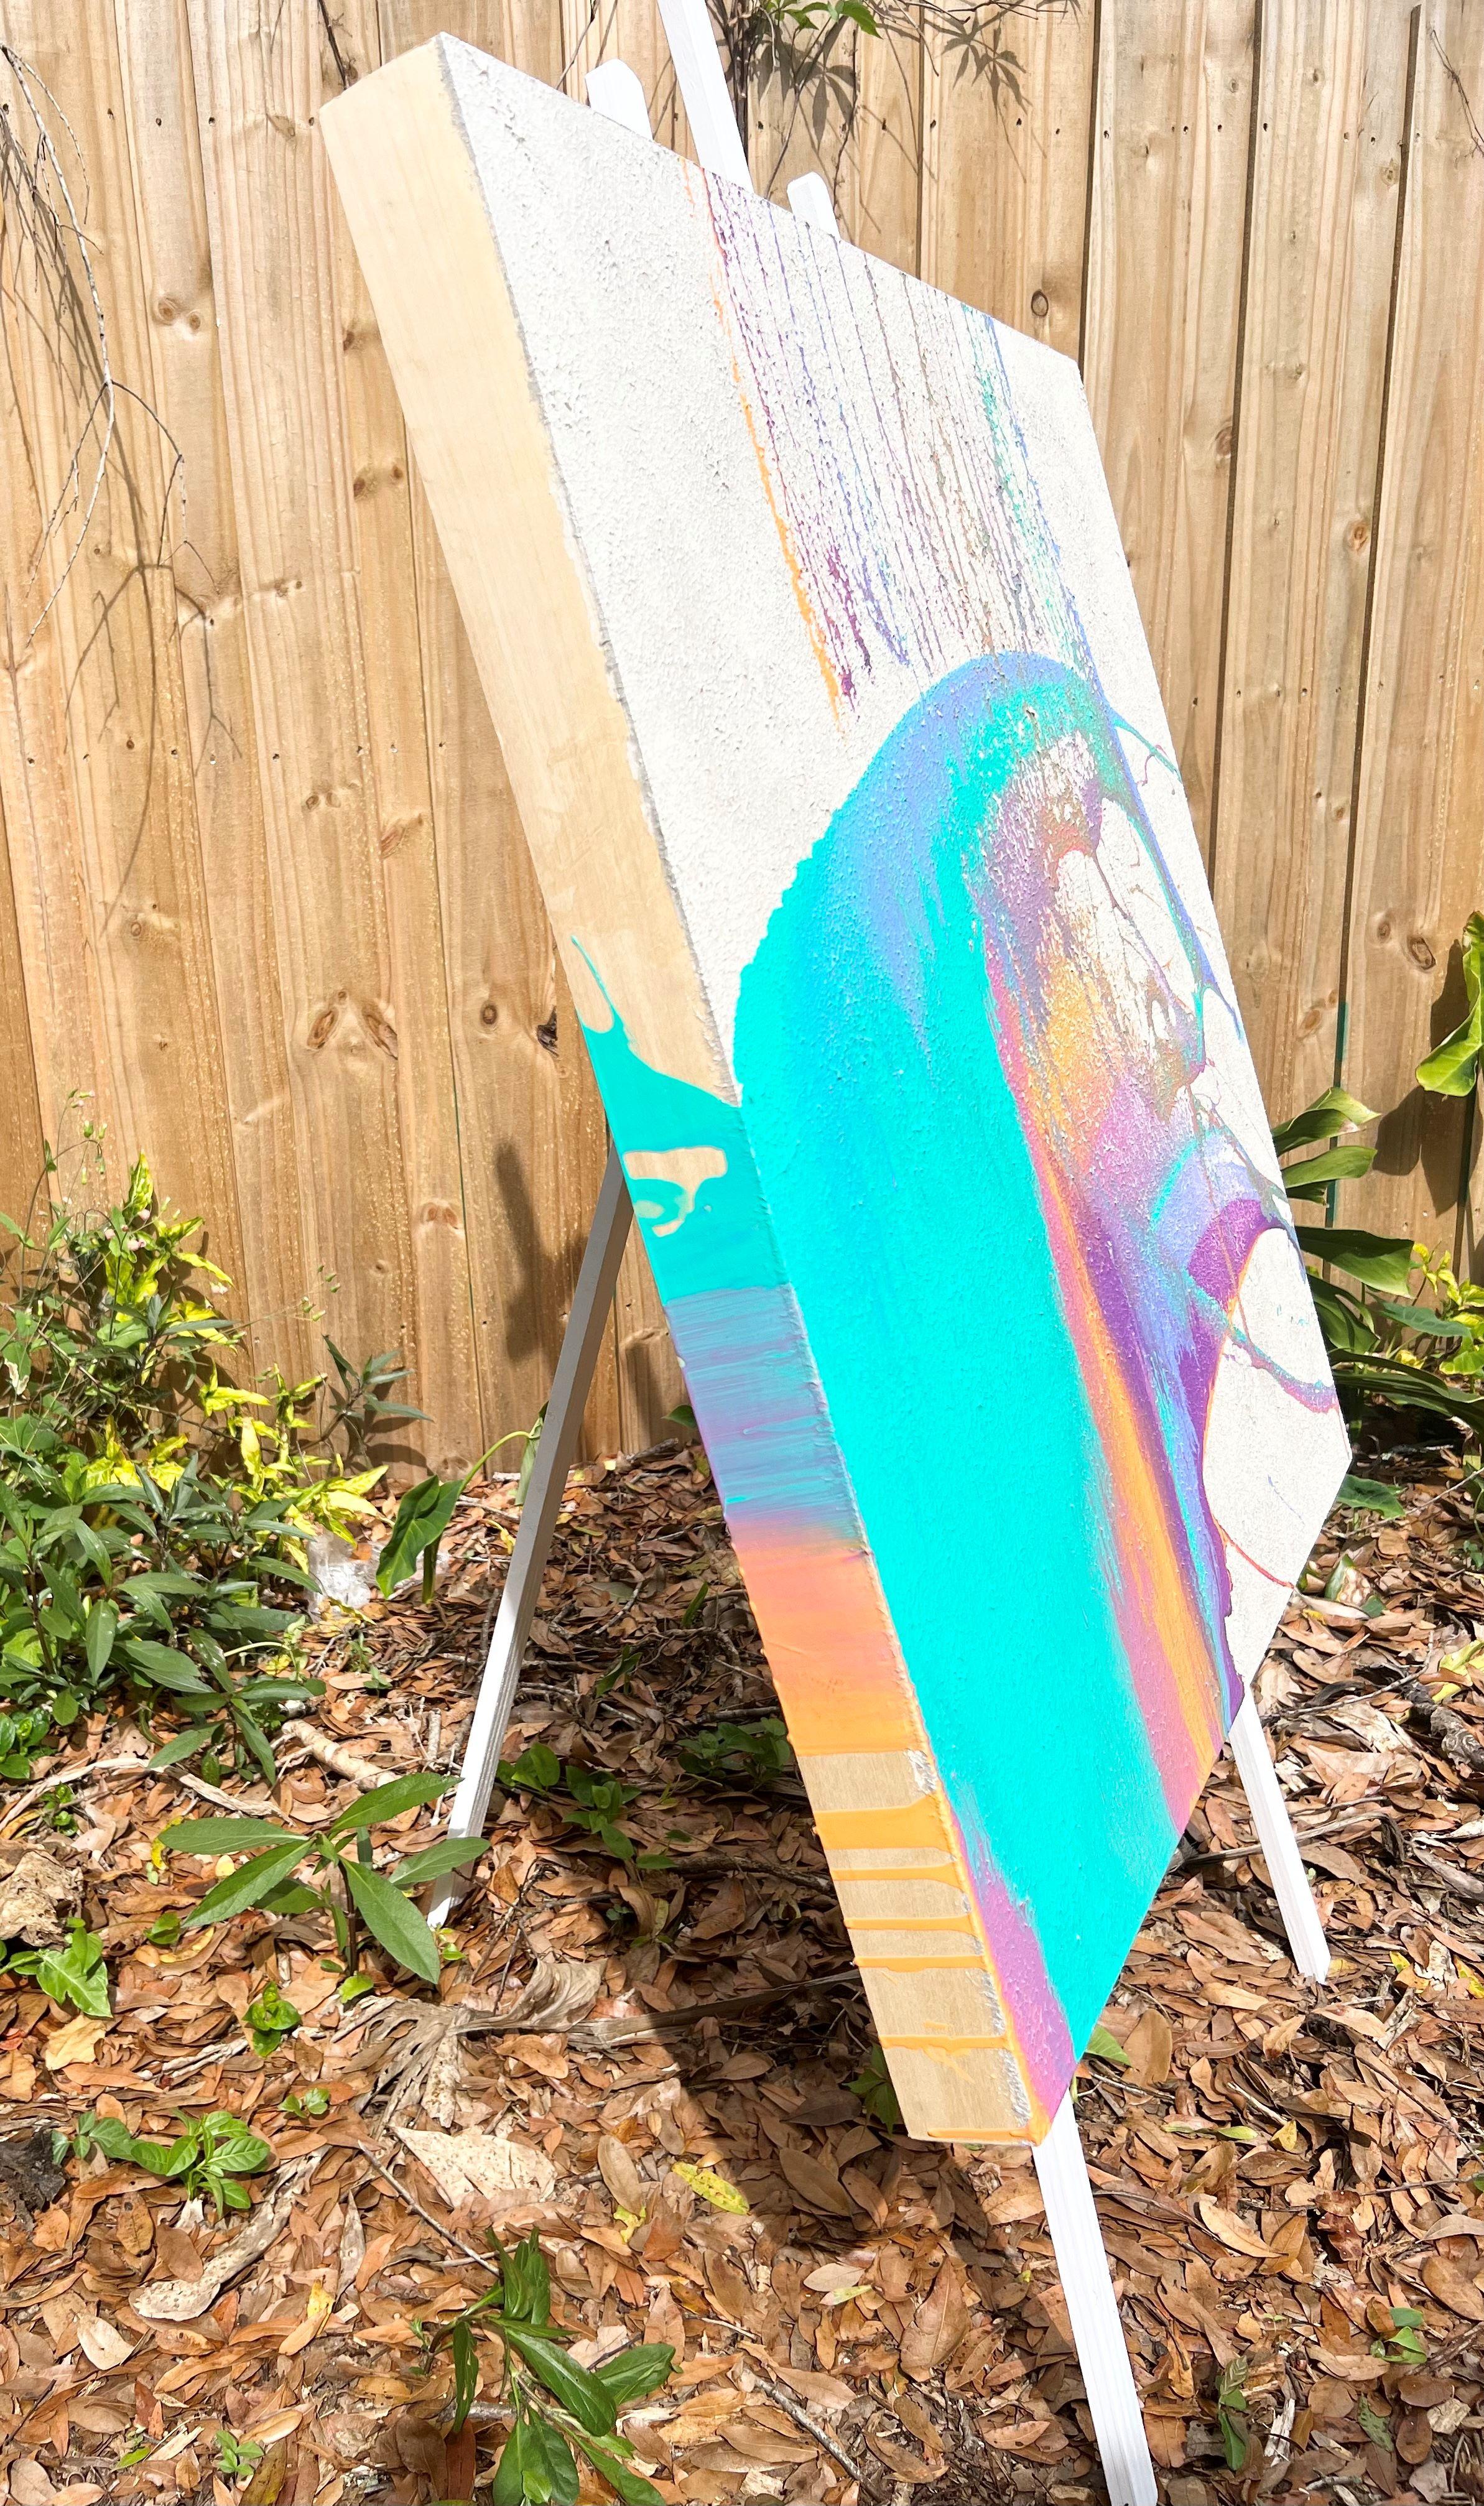 <p>Artist Comments<br>Artist Eric Wilson exhibits a spontaneous acrylic pour piece with a pearly iridescent background. Vivid turquoise hues cascade into a spectrum of purple, pink, and yellow. â€œUpon completing this painting, I noticed an